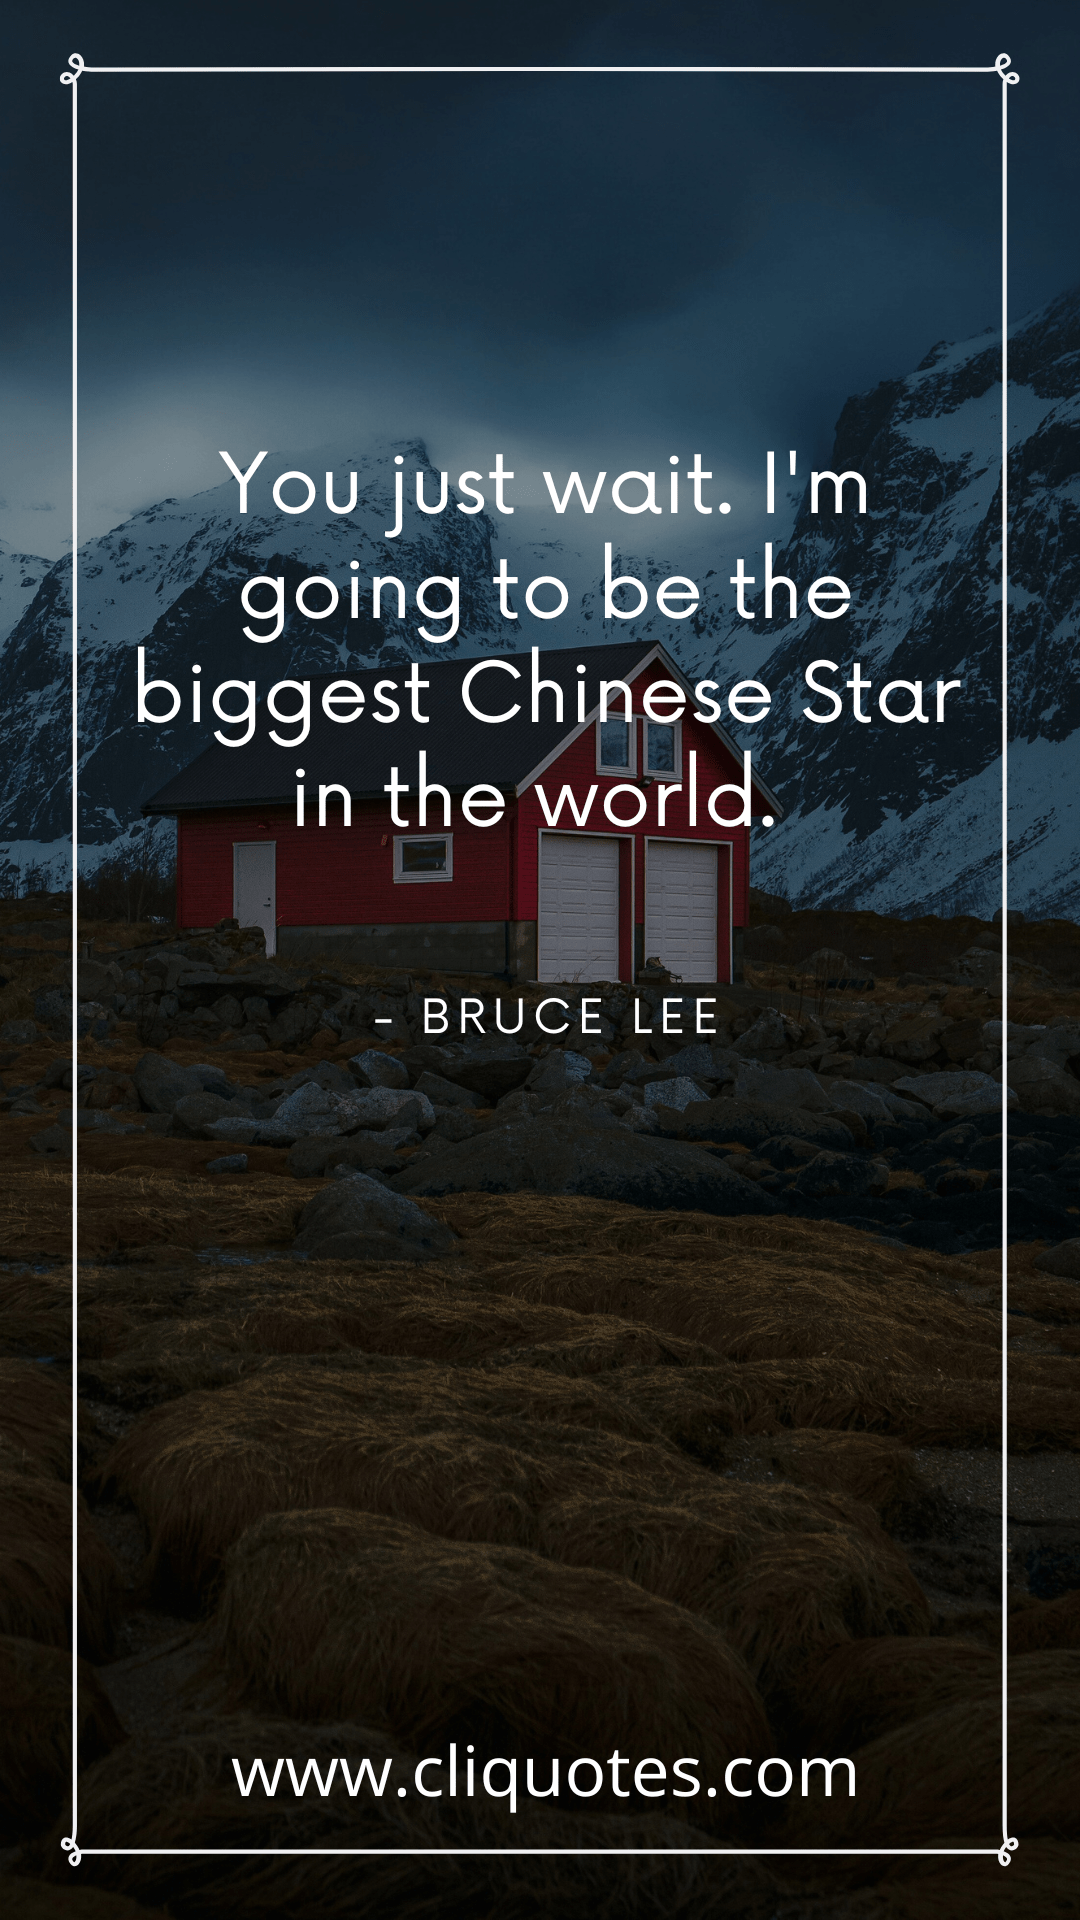 You just wait. I'm going to be the biggest Chinese Star in the world. - Bruce Lee